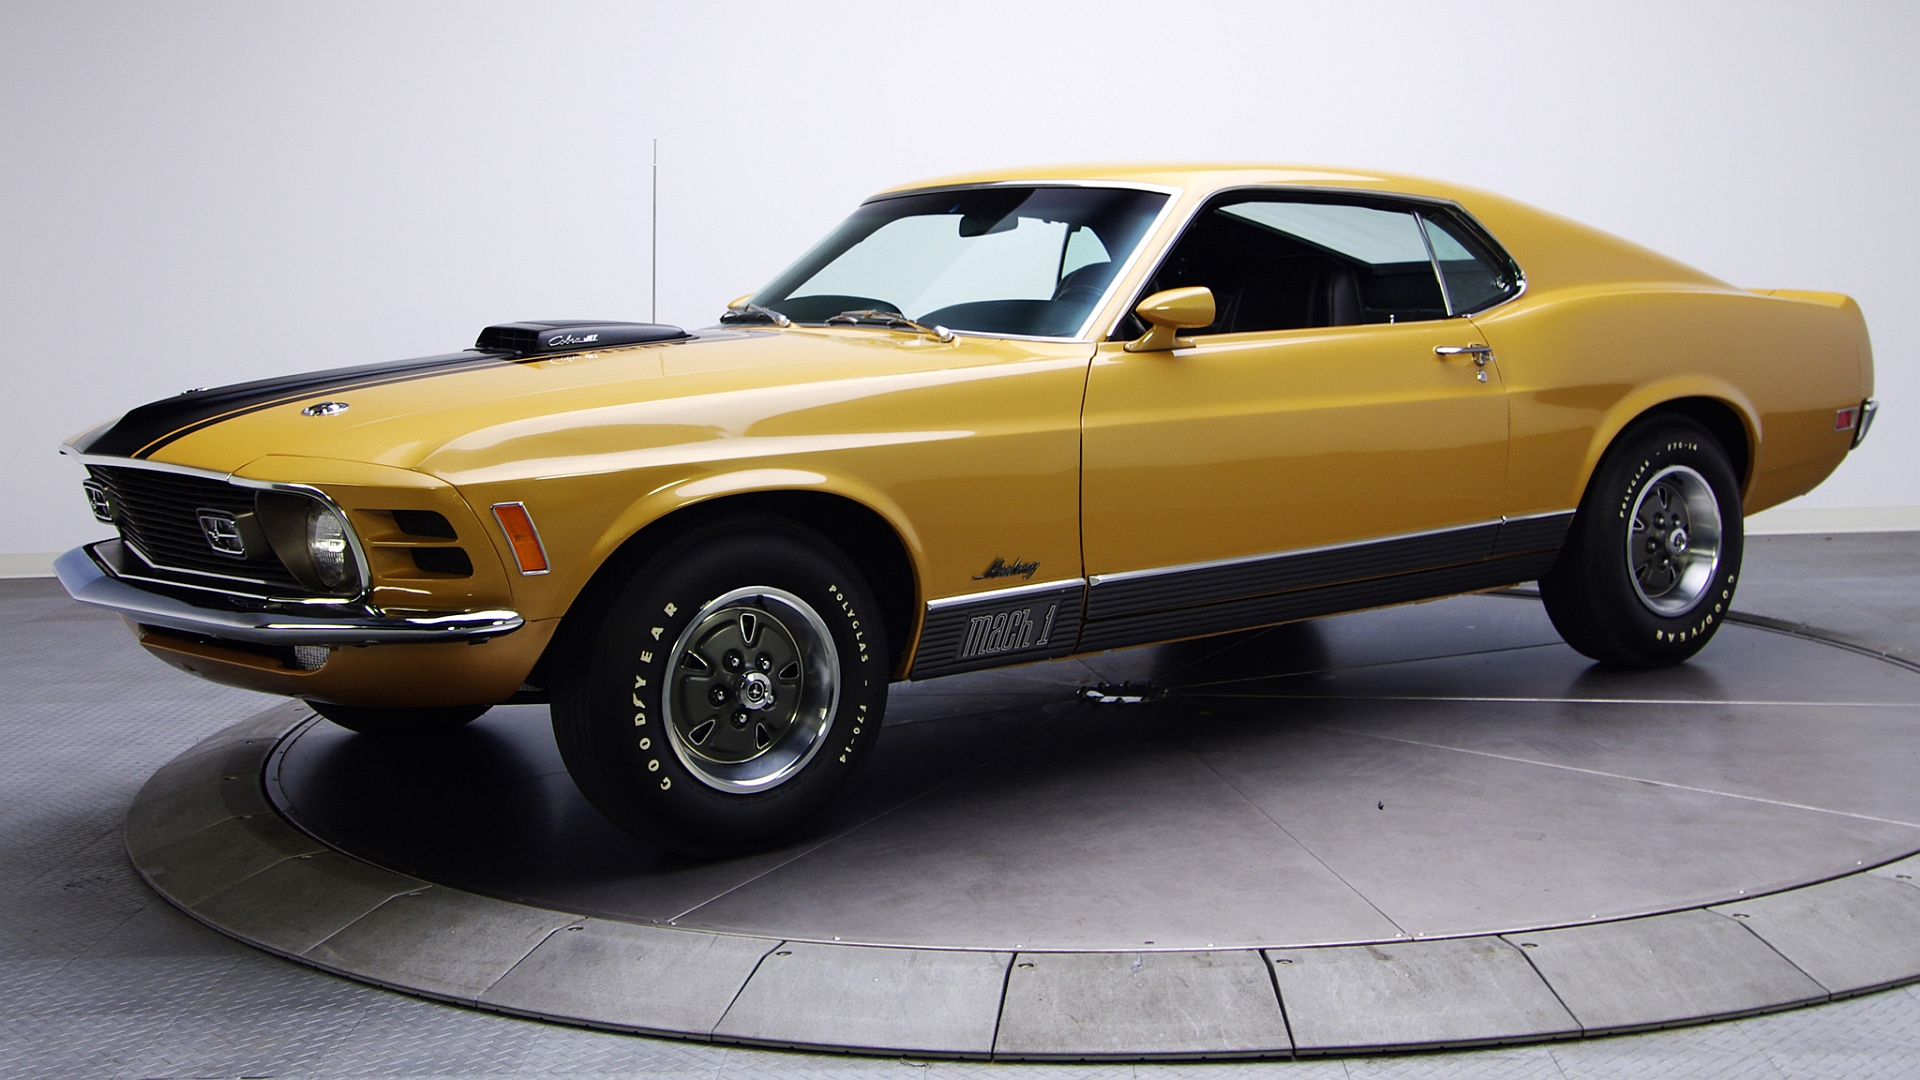 Fastback Ford Mustang Mach 1 Muscle Car 1920x1080